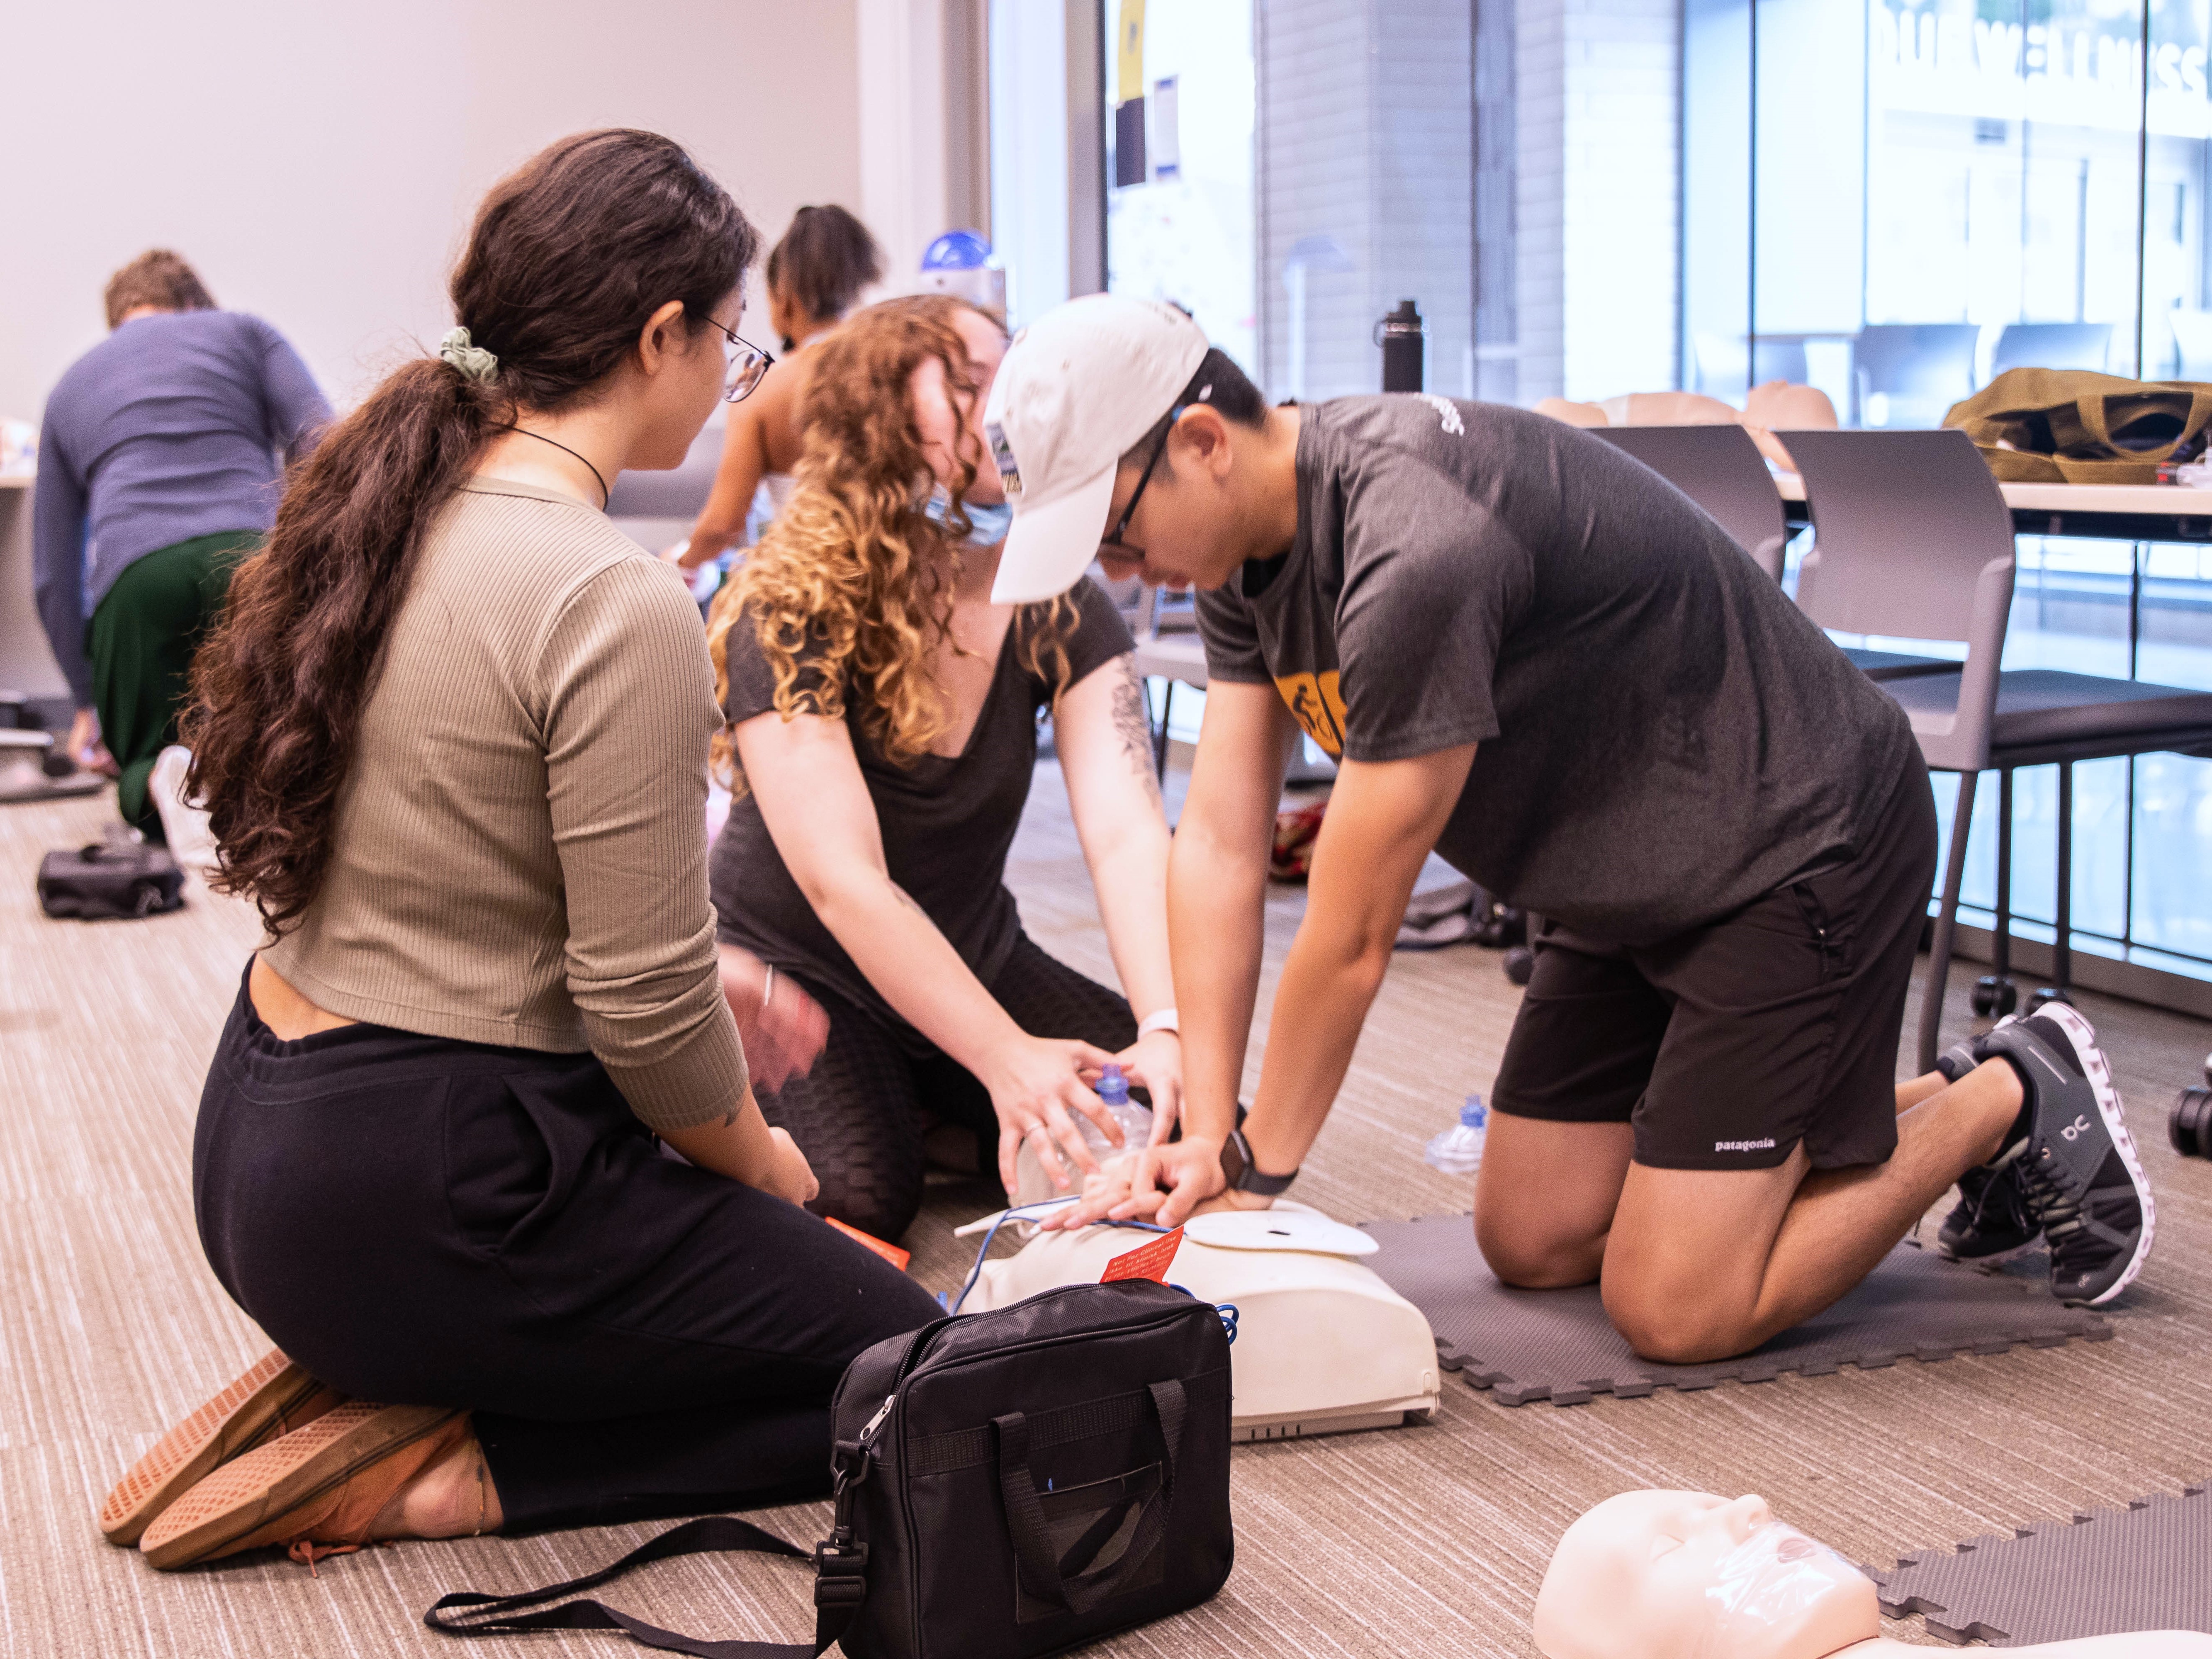 Students performing CPR on a dummy